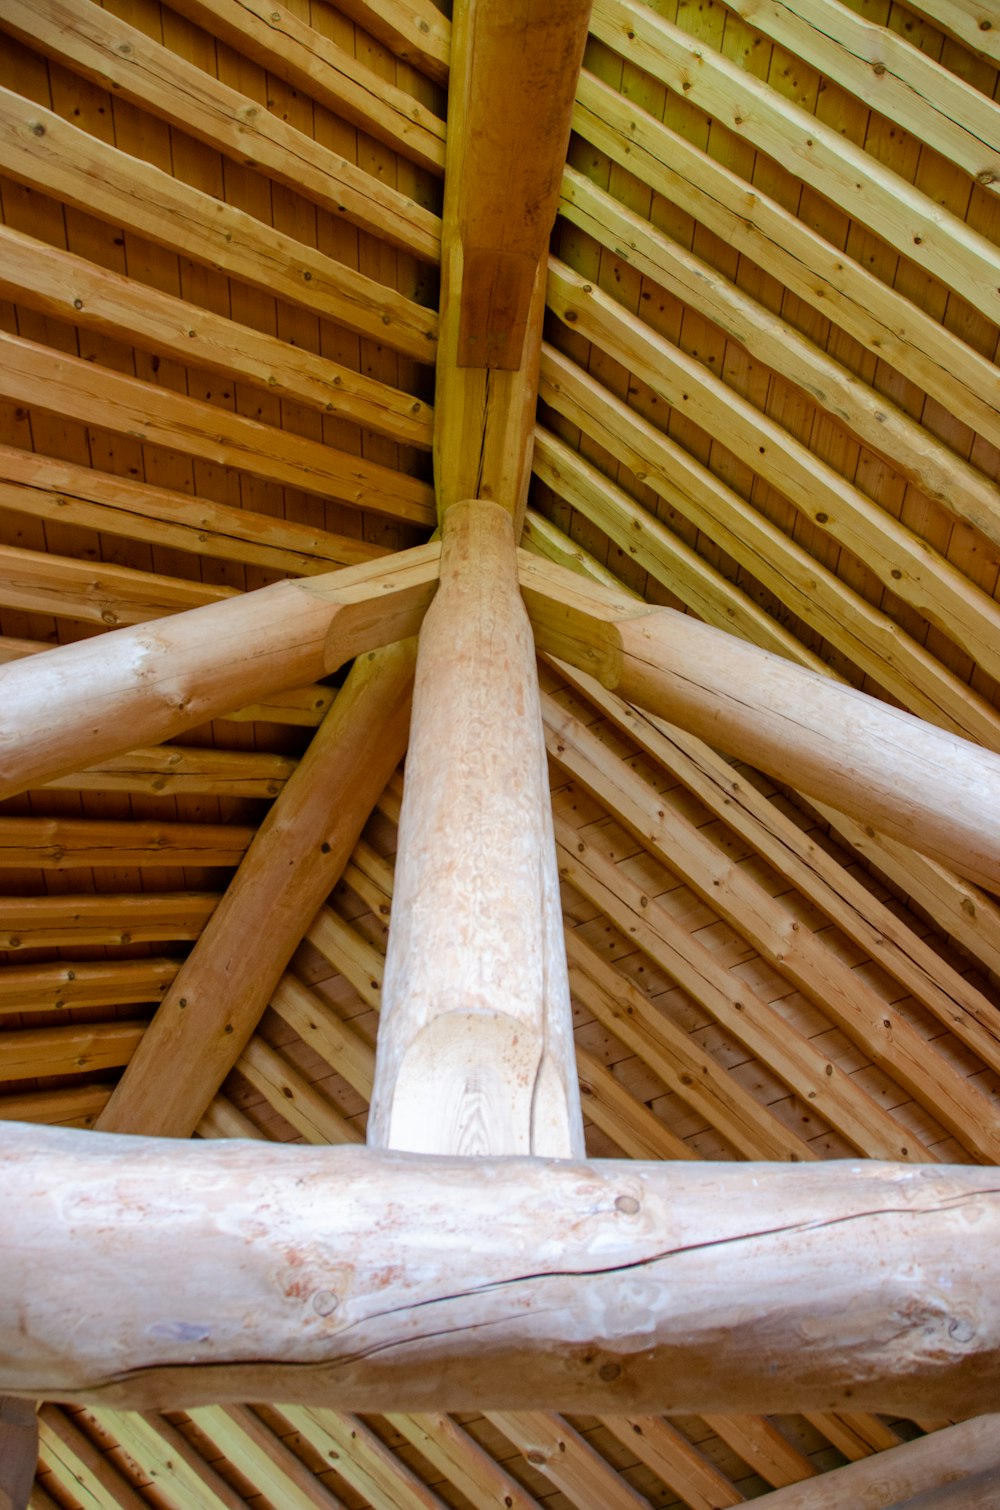 a close up of a wooden structure made of logs